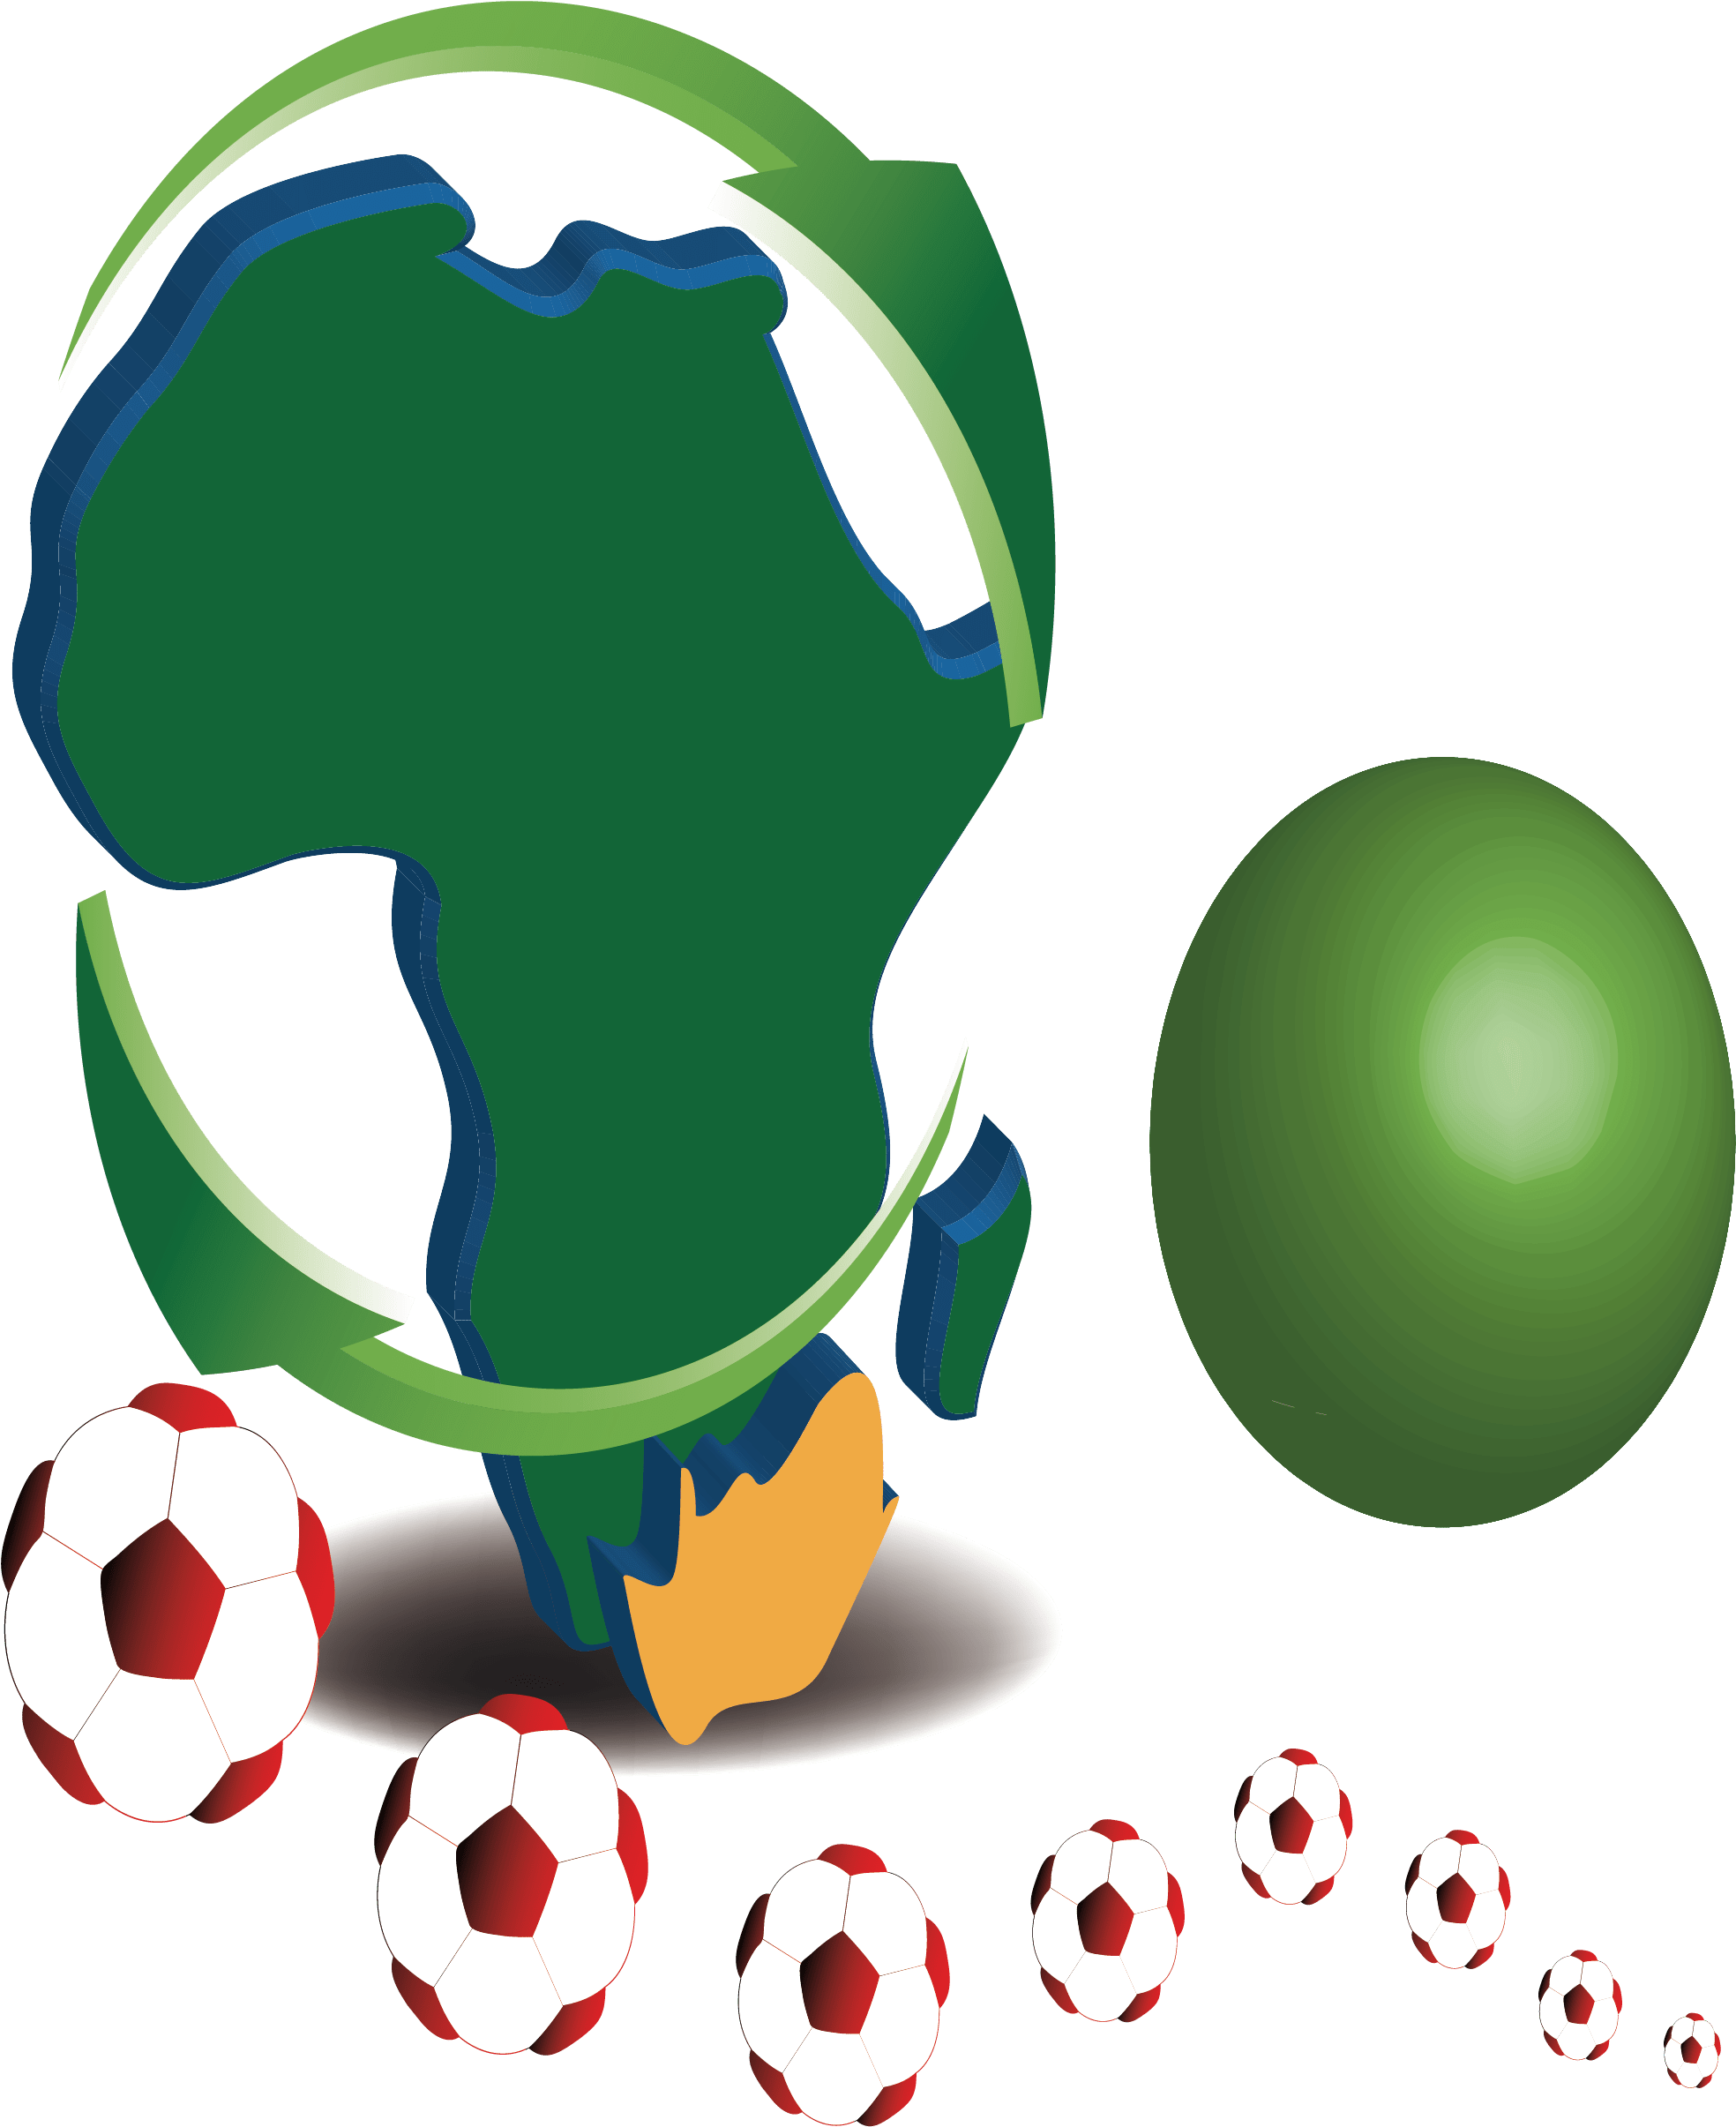 World Cup Football Clipart 3 By Michael - 2010 Fifa World Cup (2306x2930)